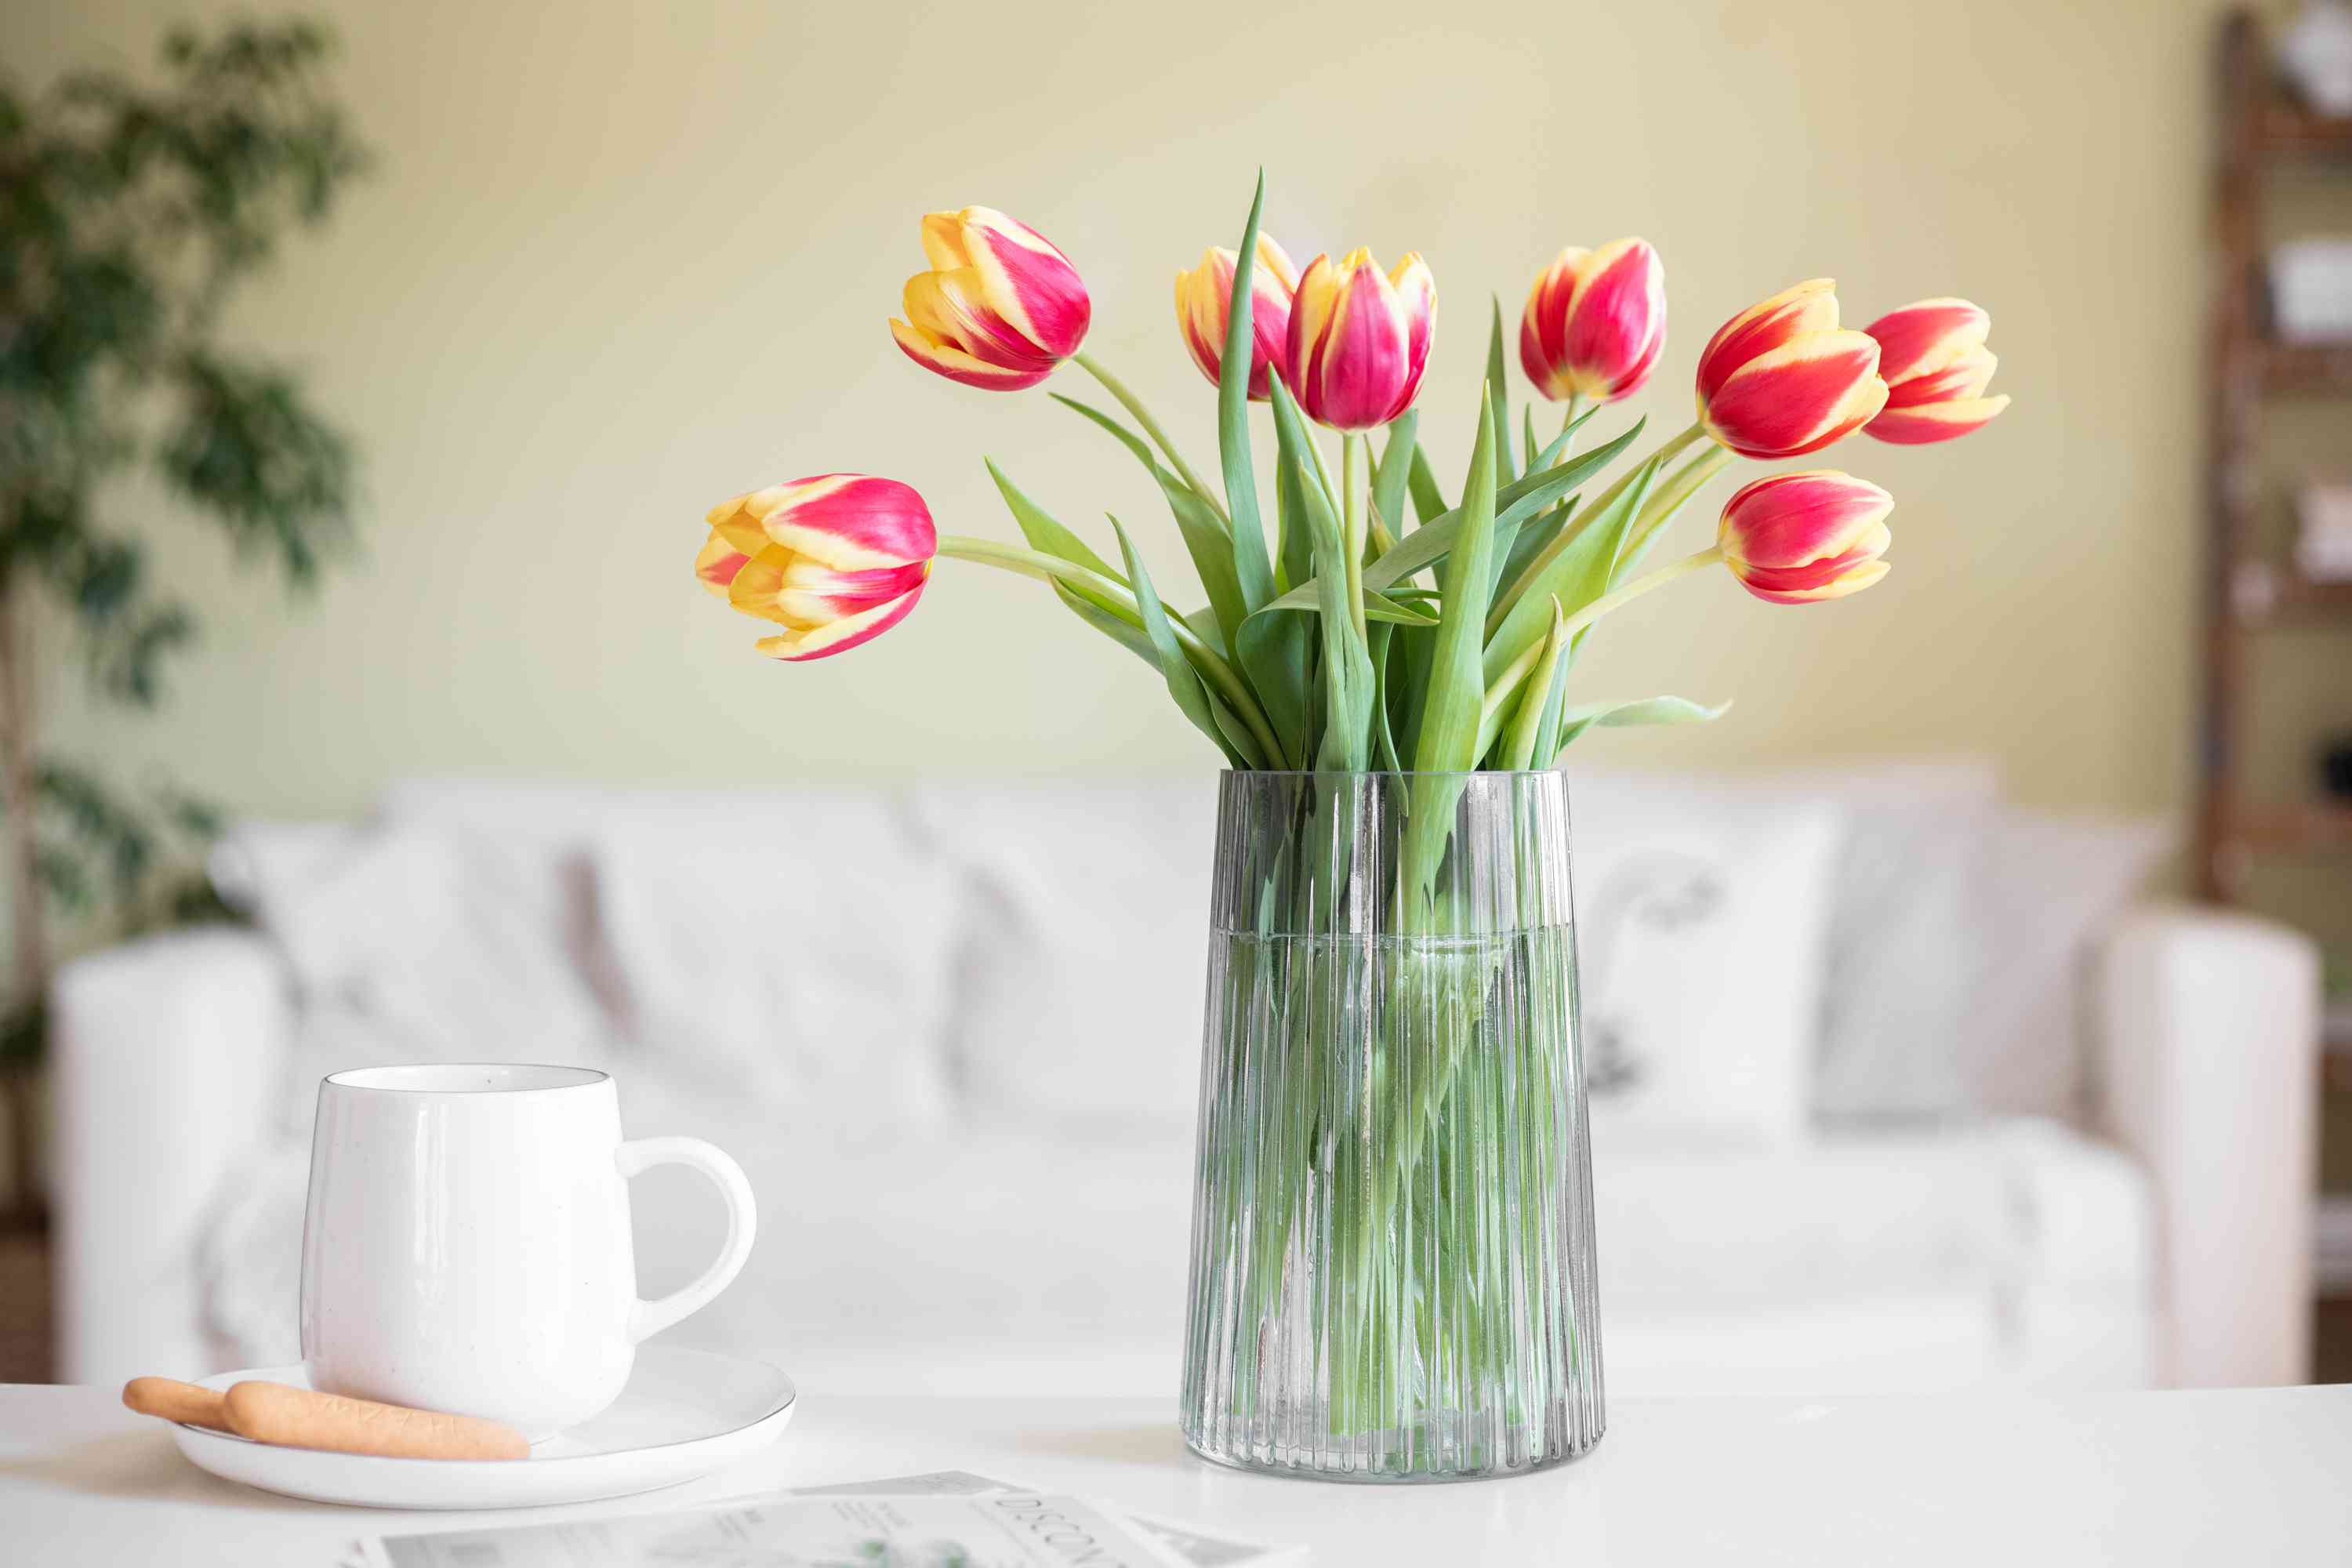 How To Store Tulips After They Bloom